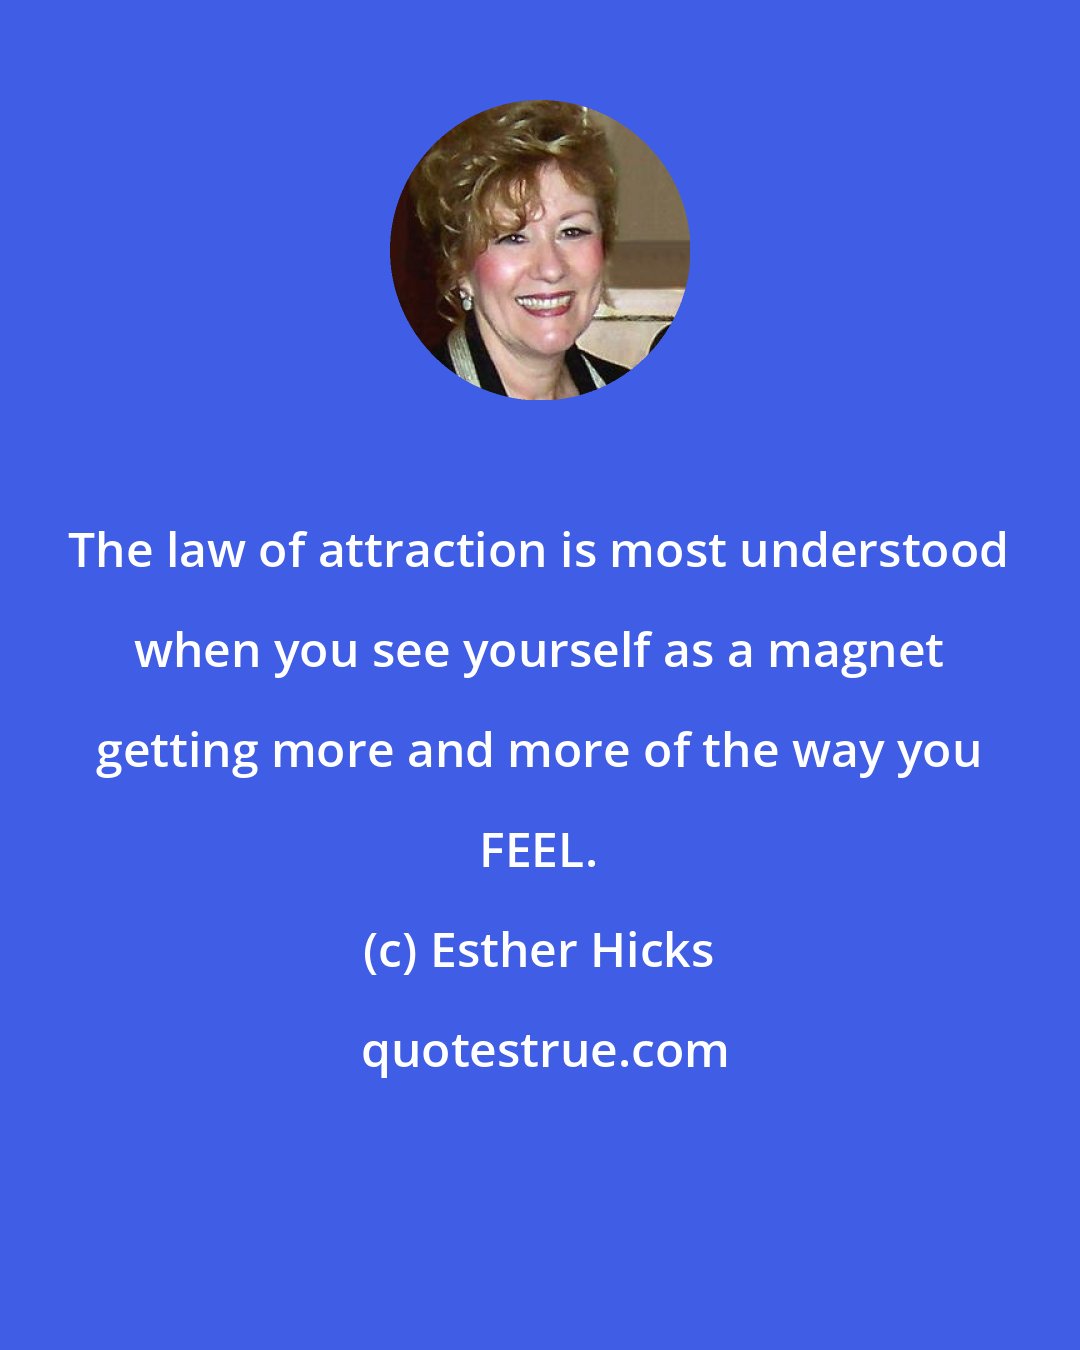 Esther Hicks: The law of attraction is most understood when you see yourself as a magnet getting more and more of the way you FEEL.